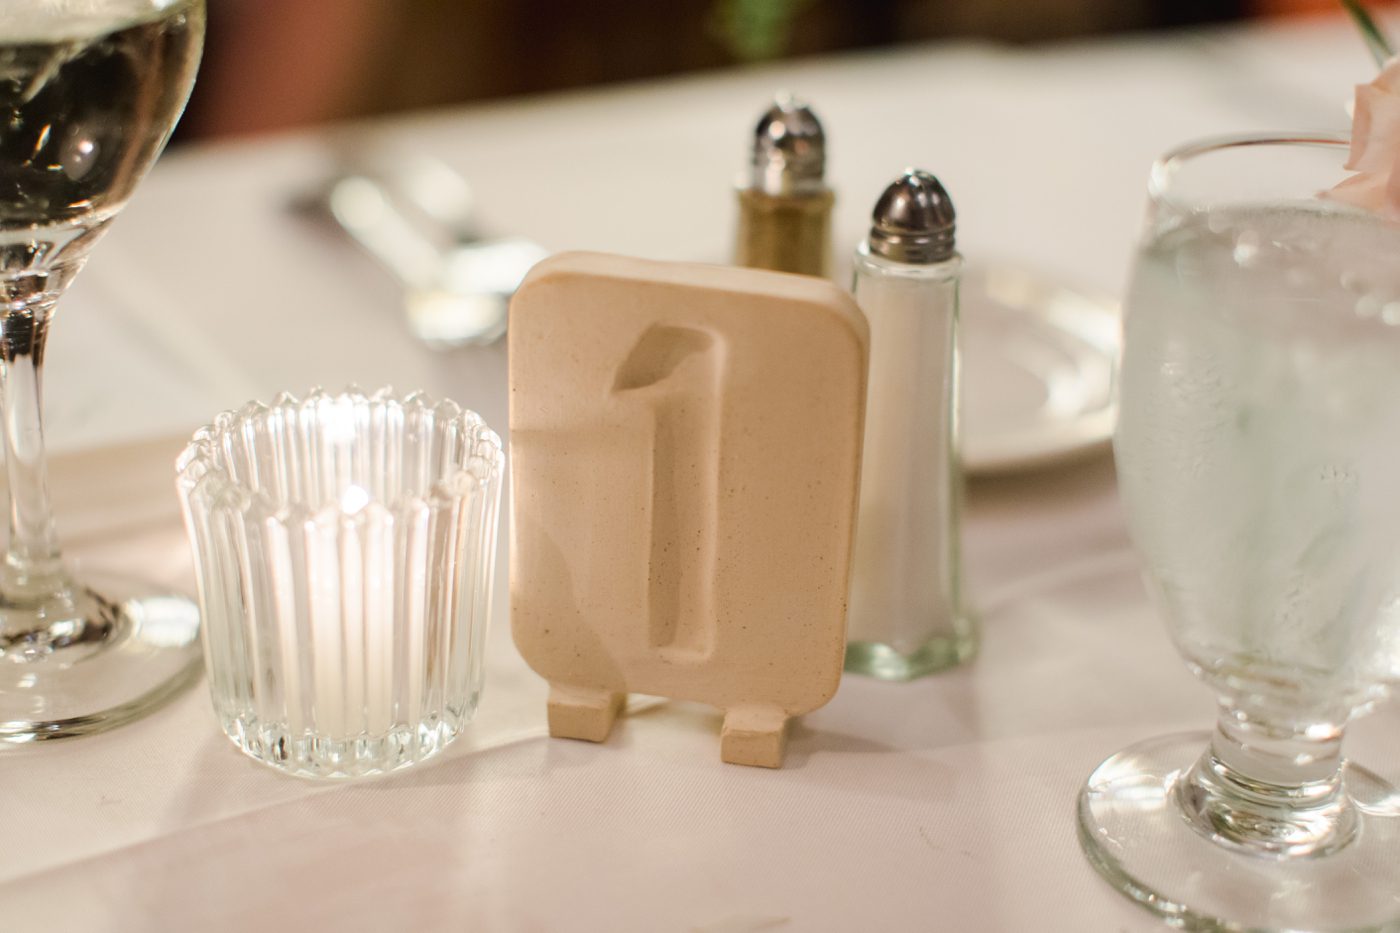 Table Numbers and Vases by Peach Pit Pottery